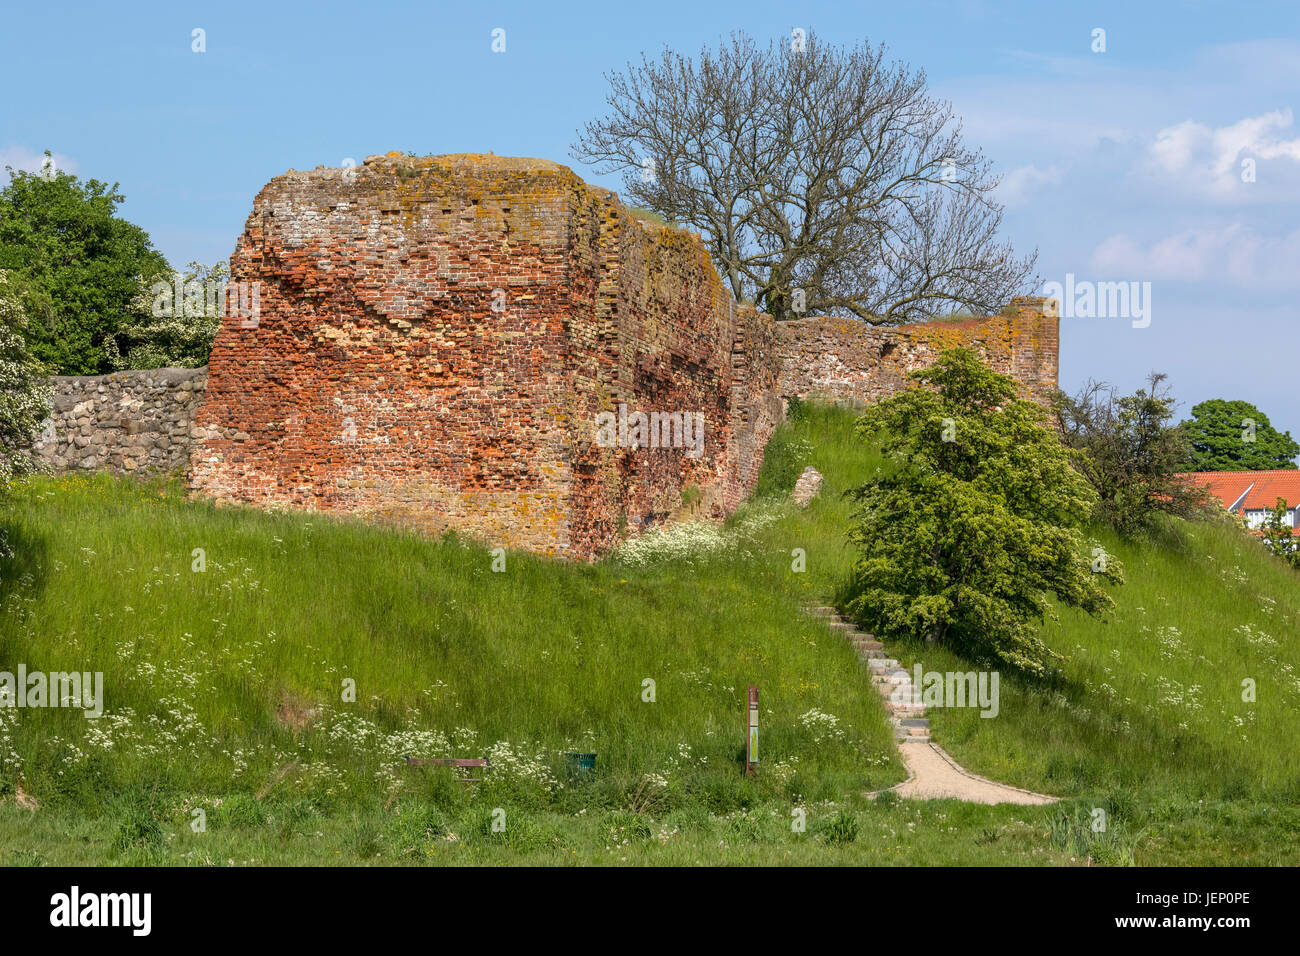 The ruin of the City Wall in Vordingborg Castle ruin, founded by king Valdemar I of Denmark, (Valdemar the Great, Valdemar den Store). Stock Photo